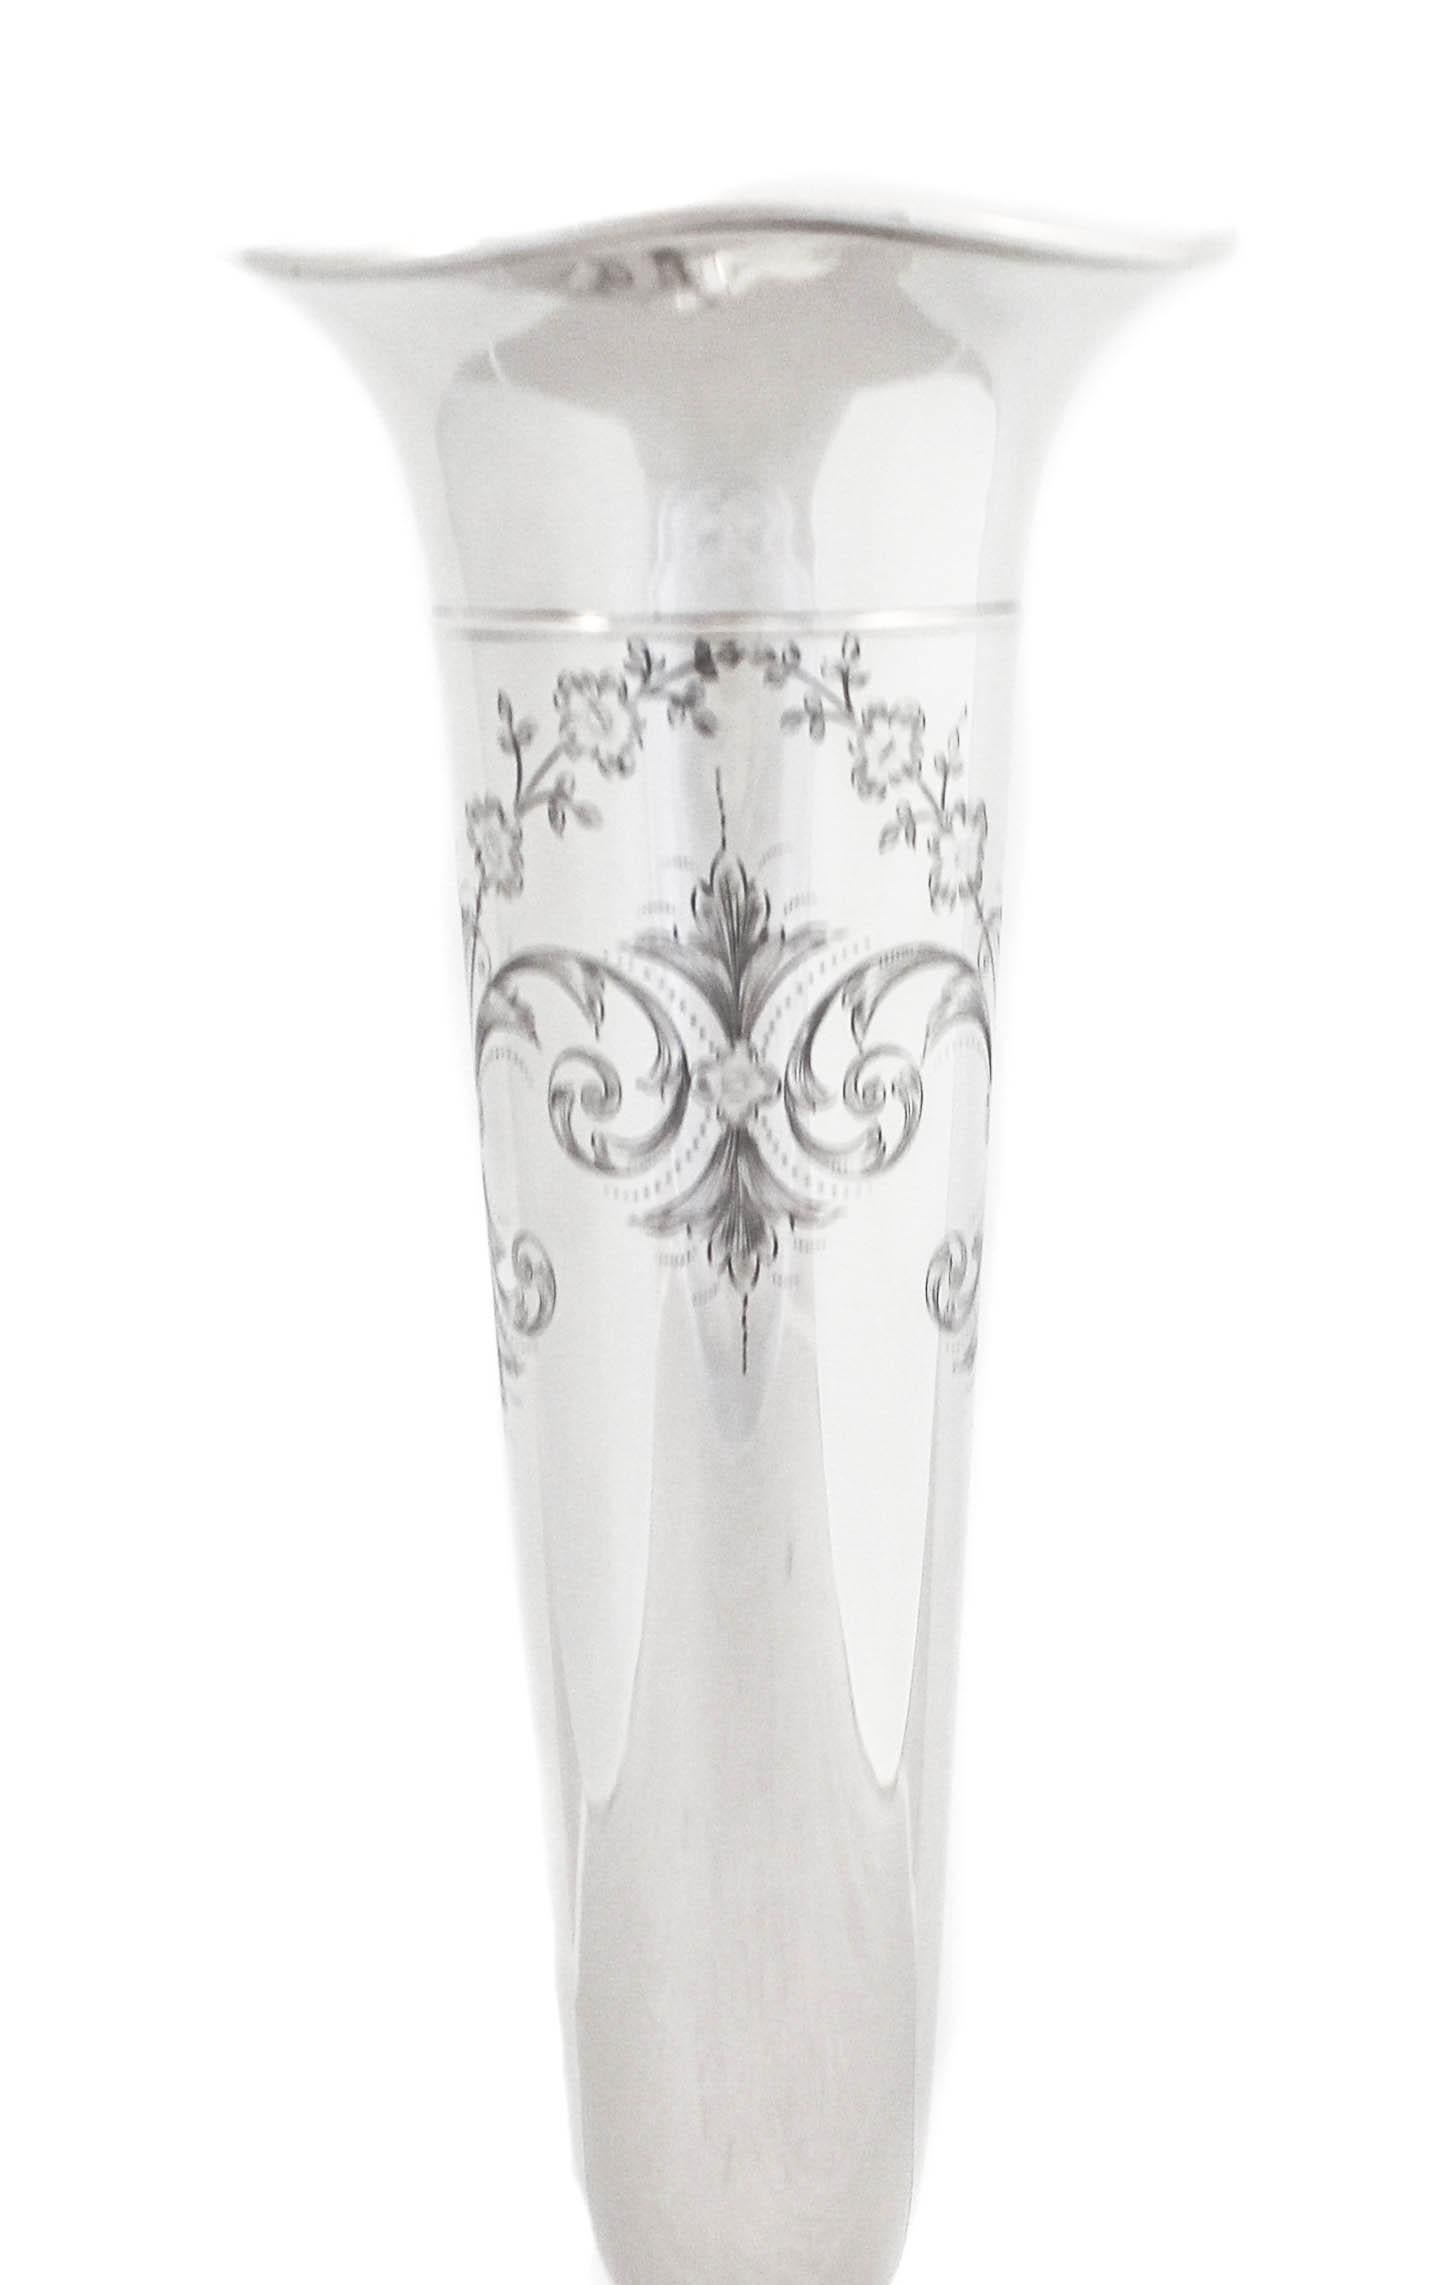 We are thrilled to offer you this sterling silver trumpet vase by George Henckel & Company of New York.  It has a fluted rim and a tapered body. There is an etched design towards the top of flowers and leaves.  The base is not weighted.  A great